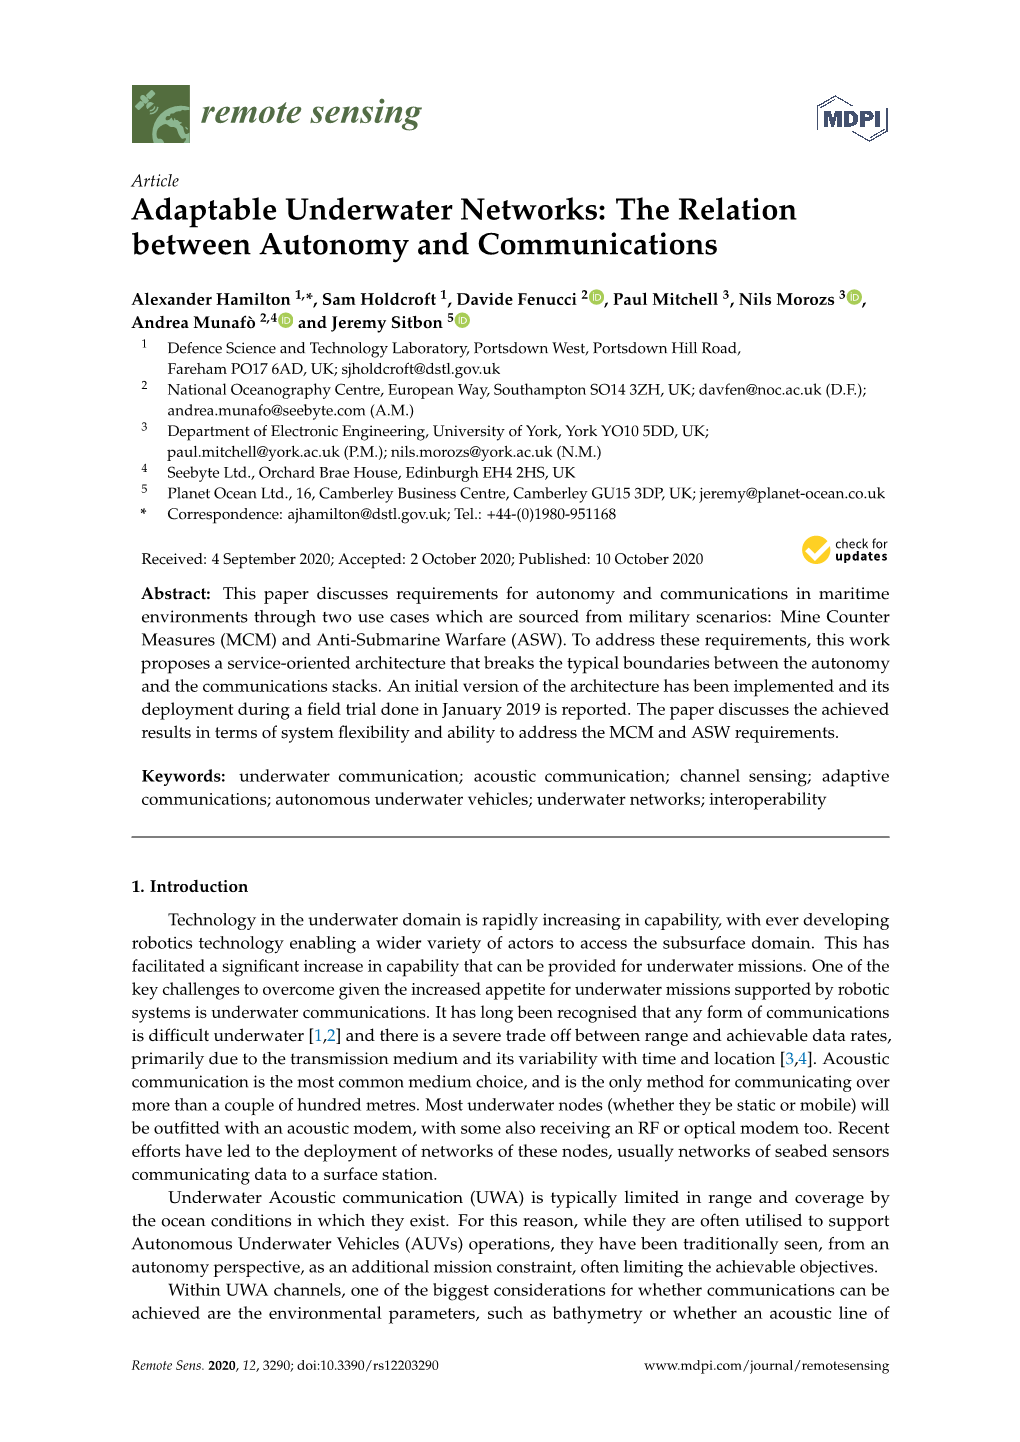 Adaptable Underwater Networks: the Relation Between Autonomy and Communications